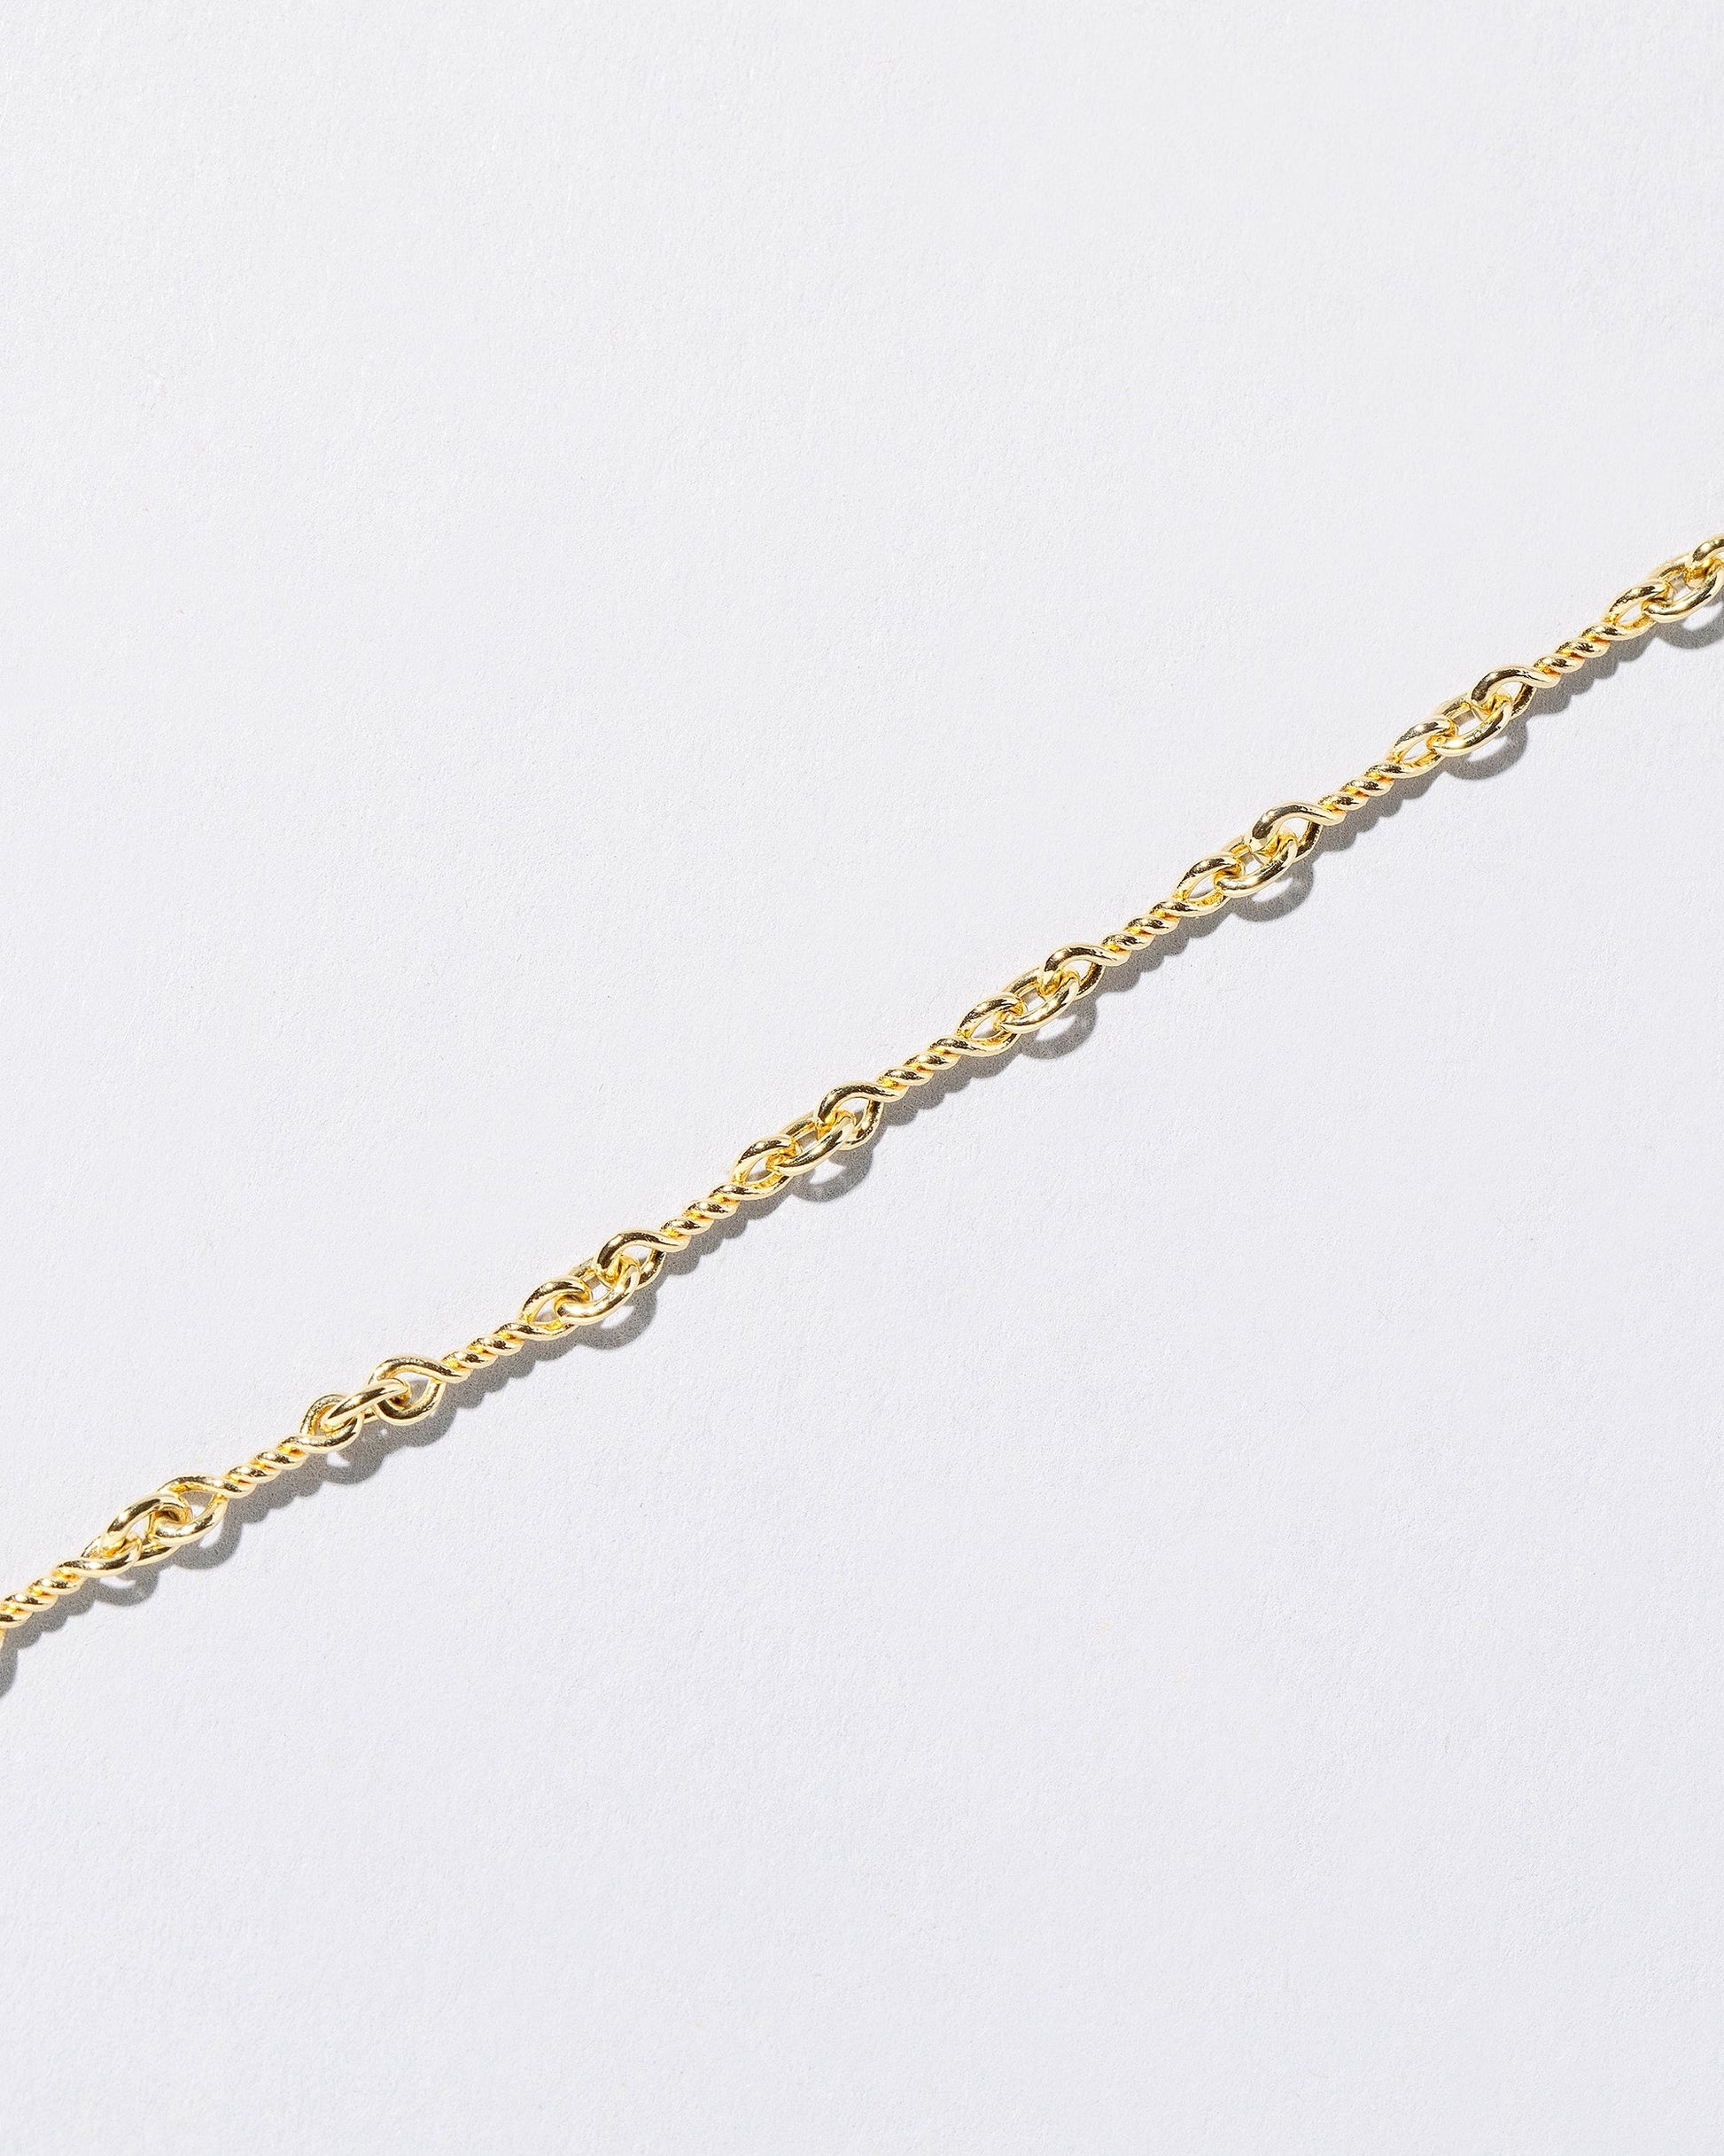 Closeup detail of the Twisted Chain Necklace on light color background.